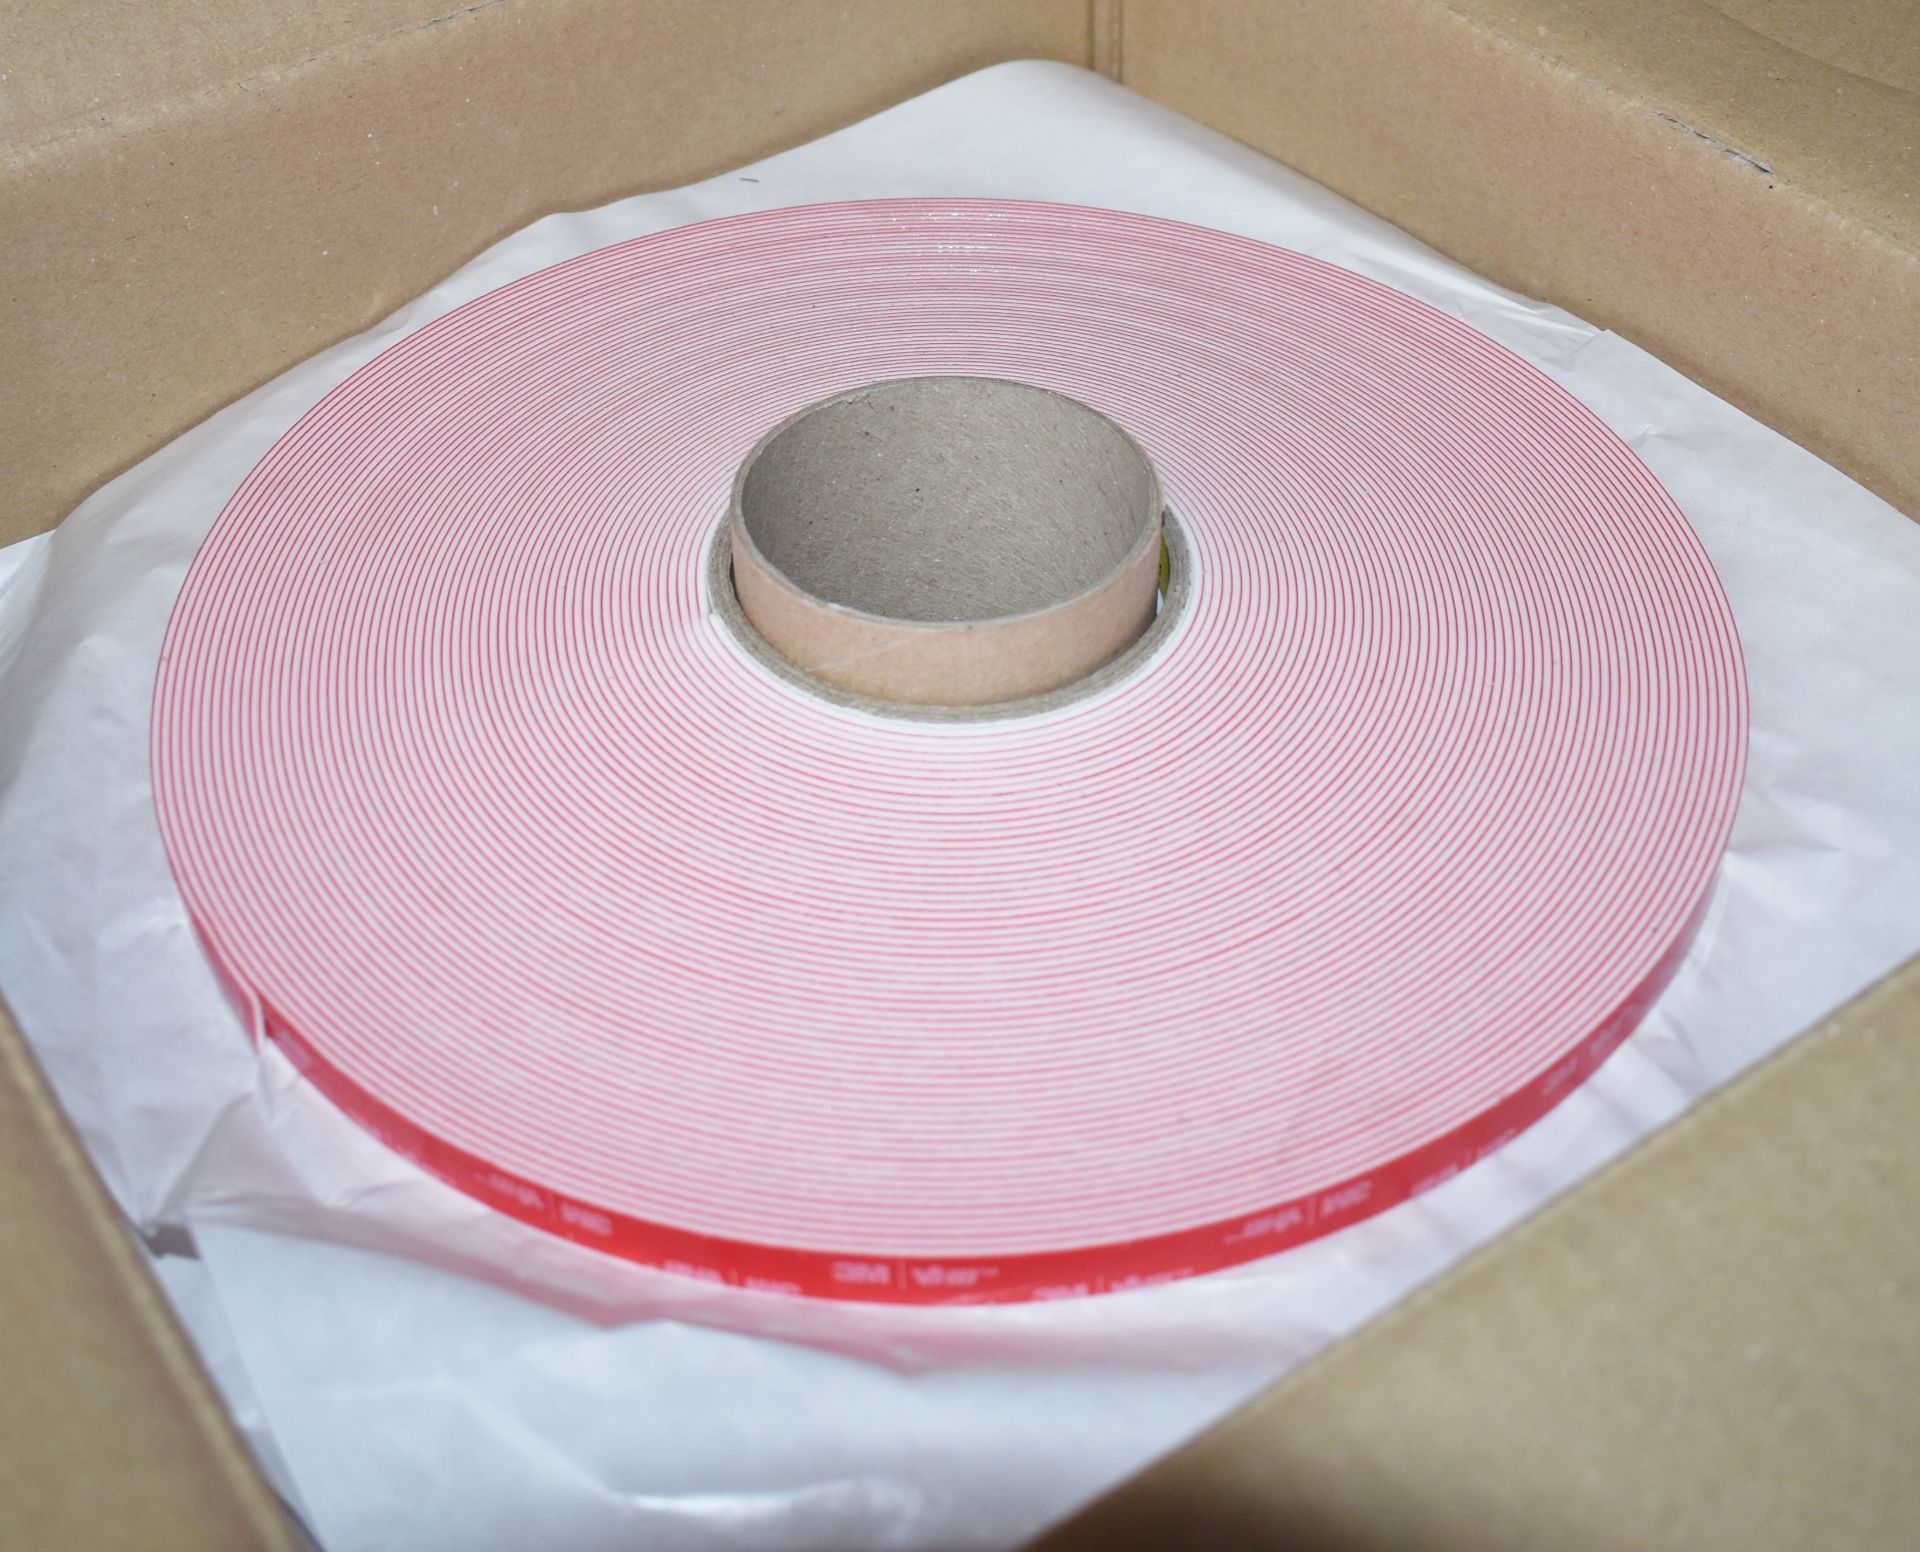 1 x Roll of 3M VHB Double Sided Acrylic Adhesive Foam Core Tape - Type LSE-160WF - RRP £42 - New - Image 4 of 4